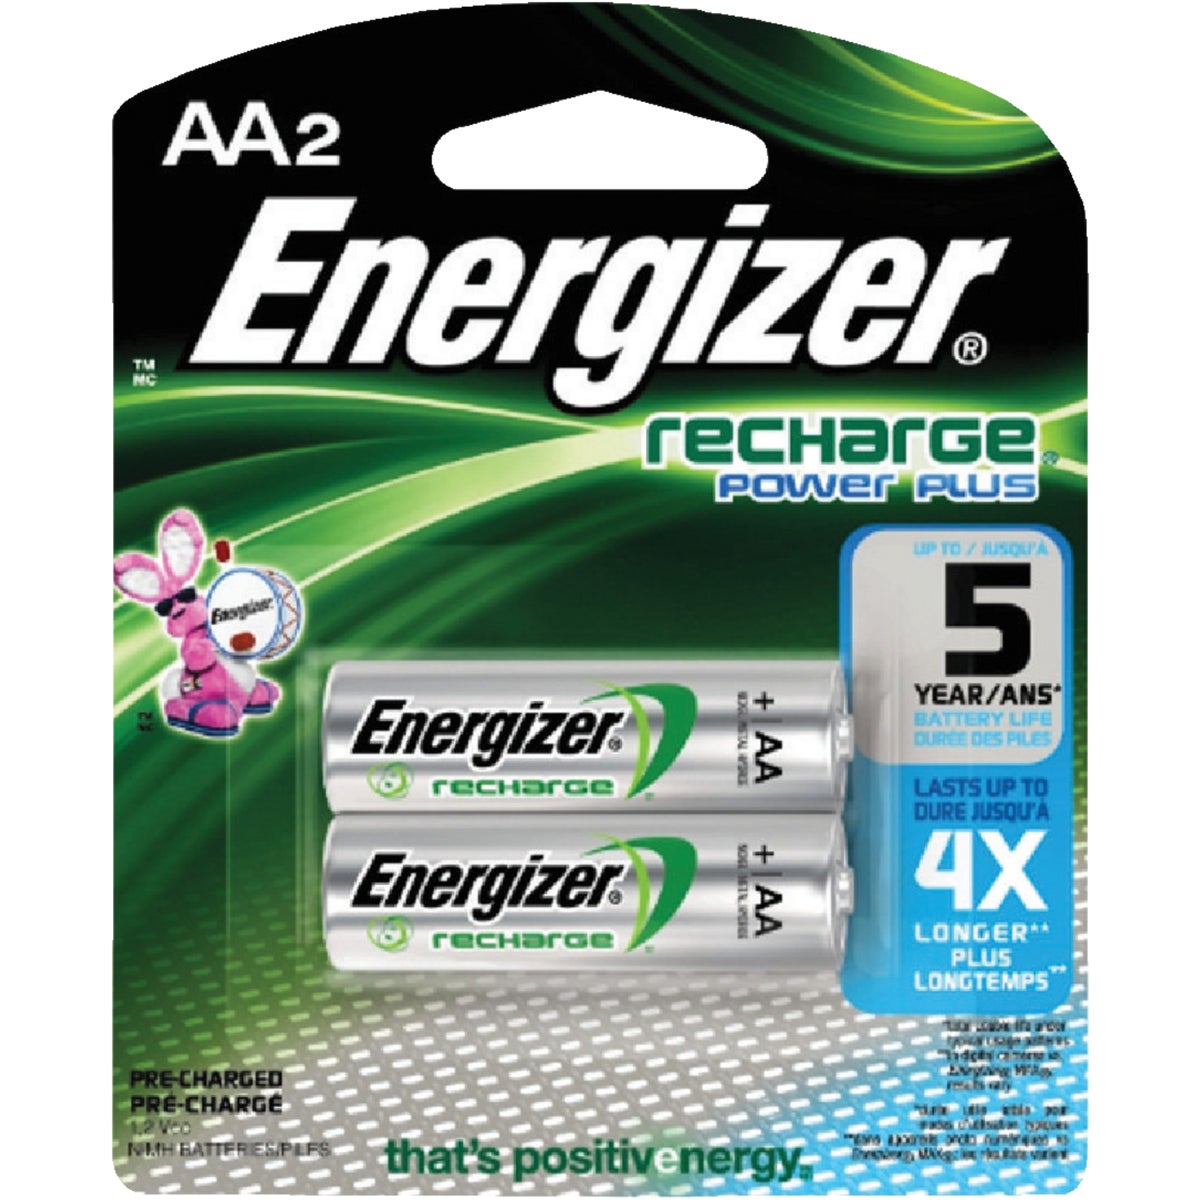 Item 828867, Power Plus Rechargeable AA Batteries offer a convenient way to power your 